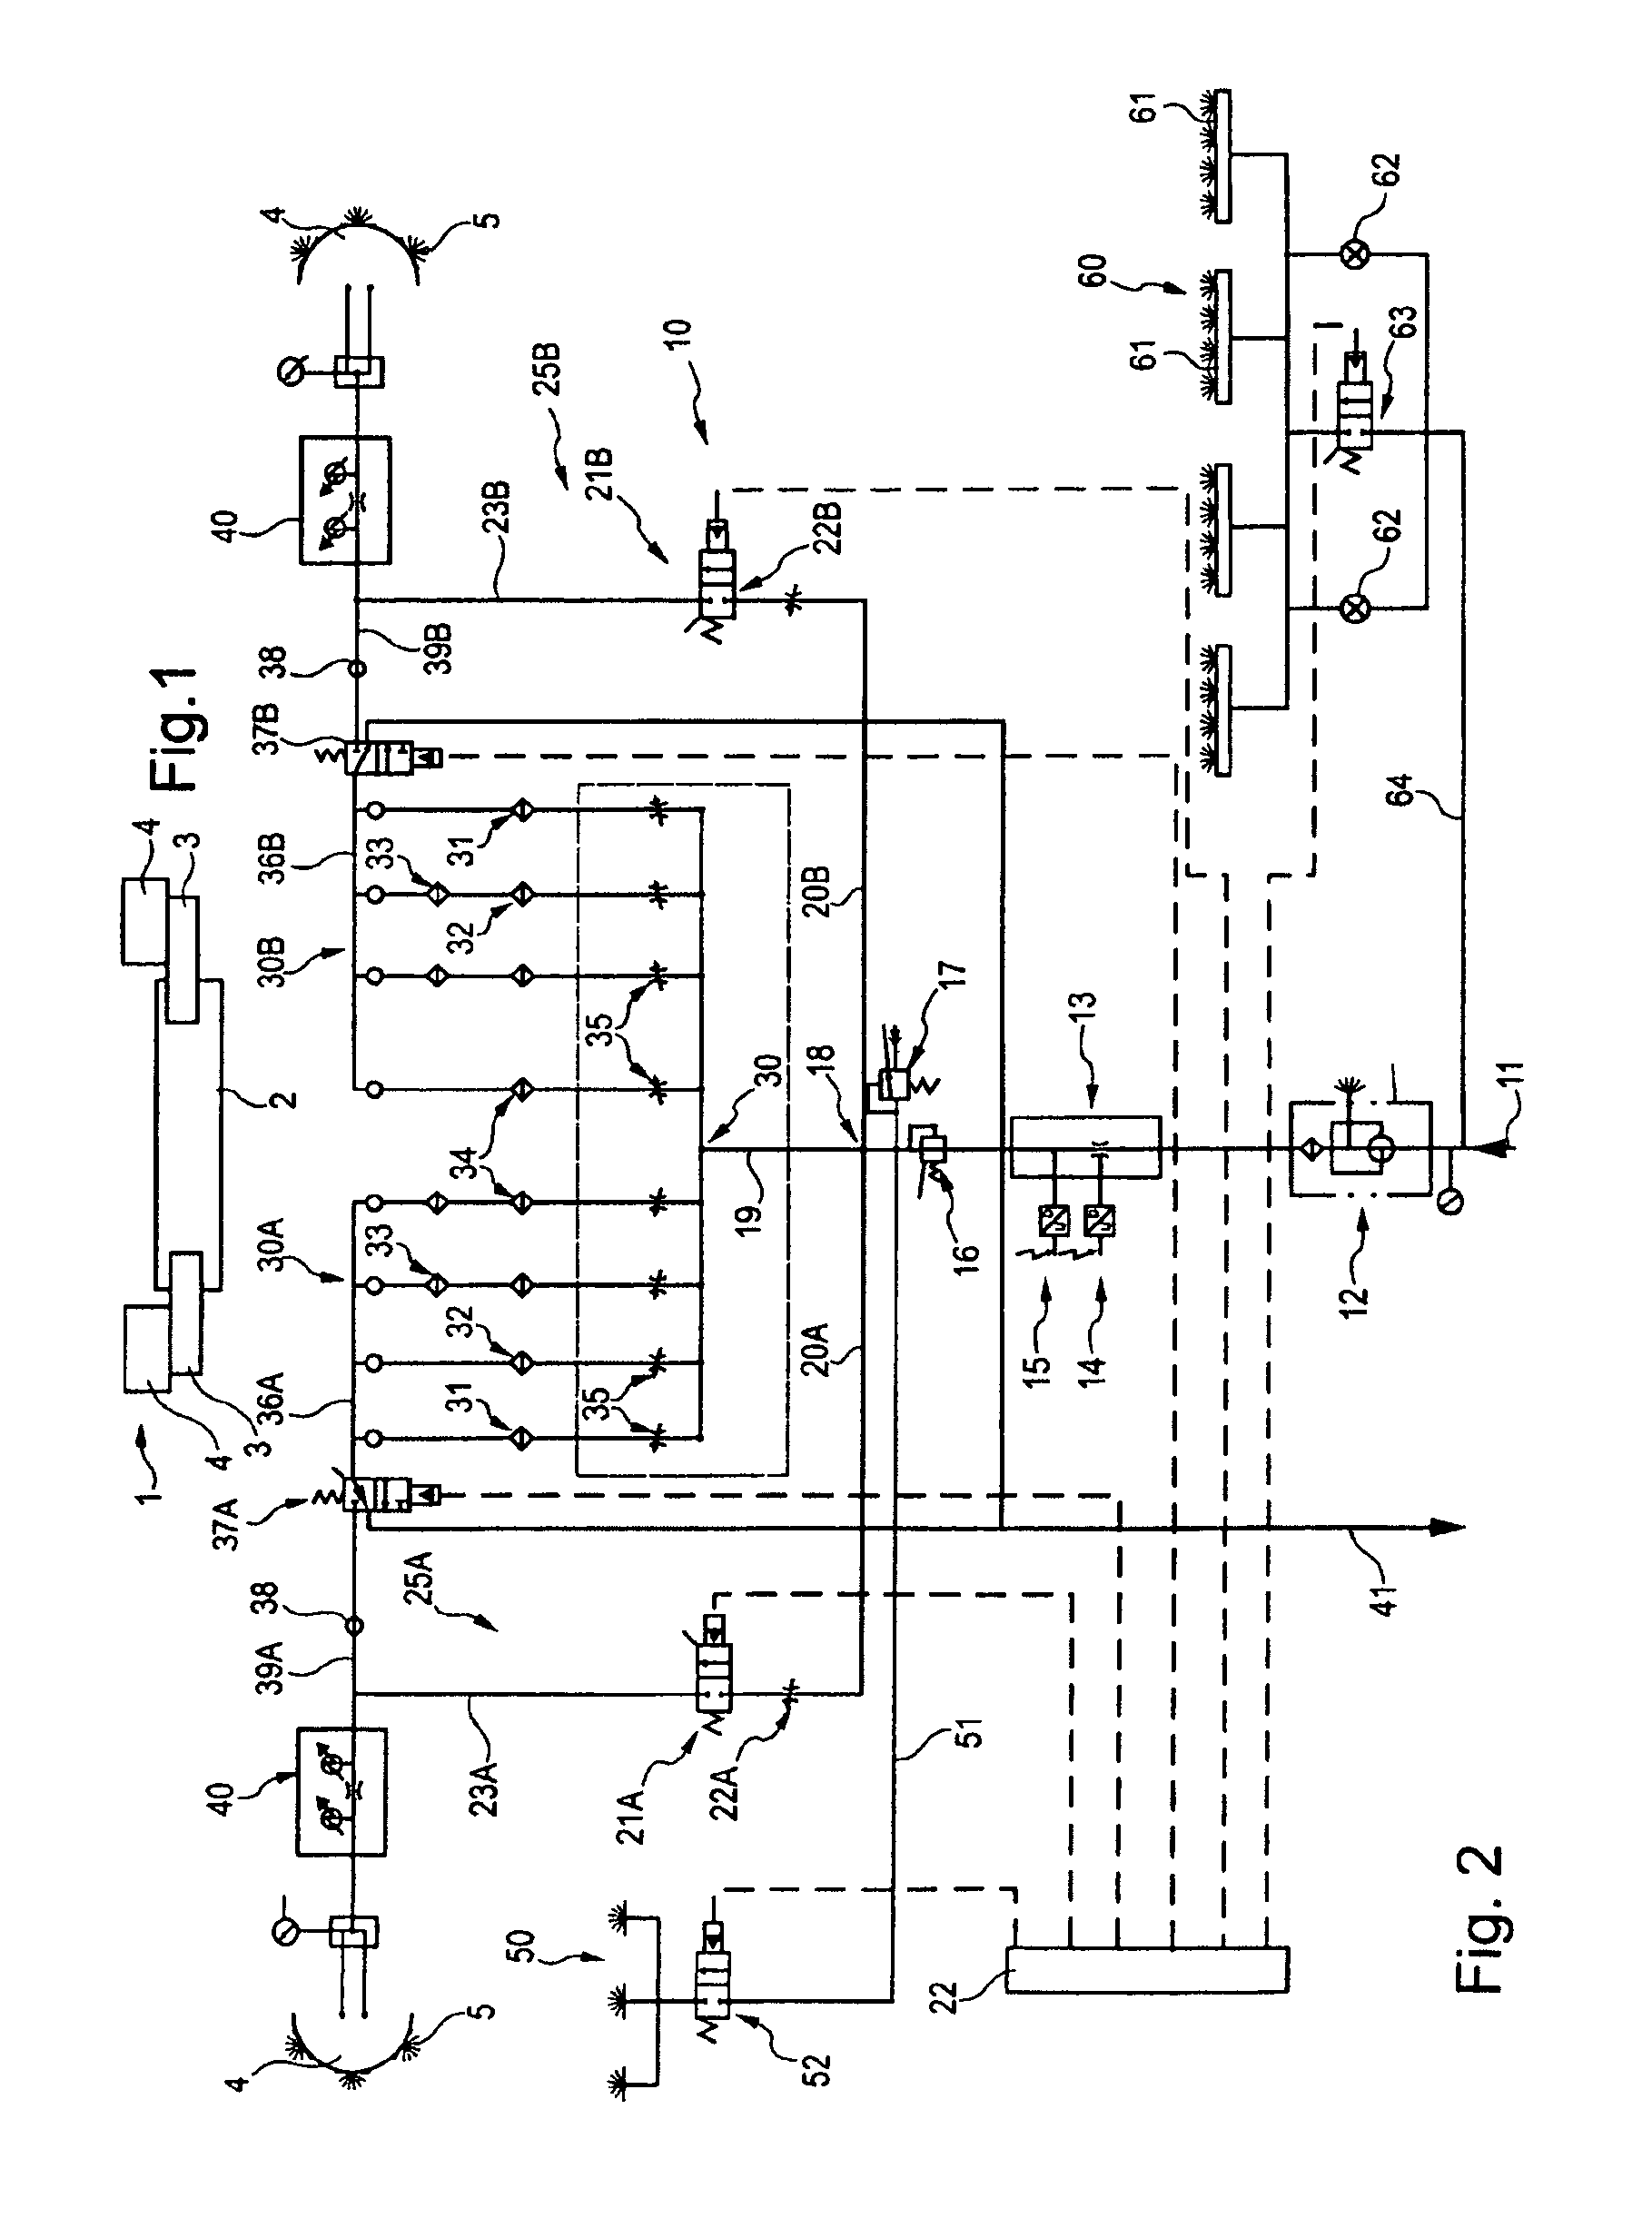 Shearer loader for underground mining comprising a spray system